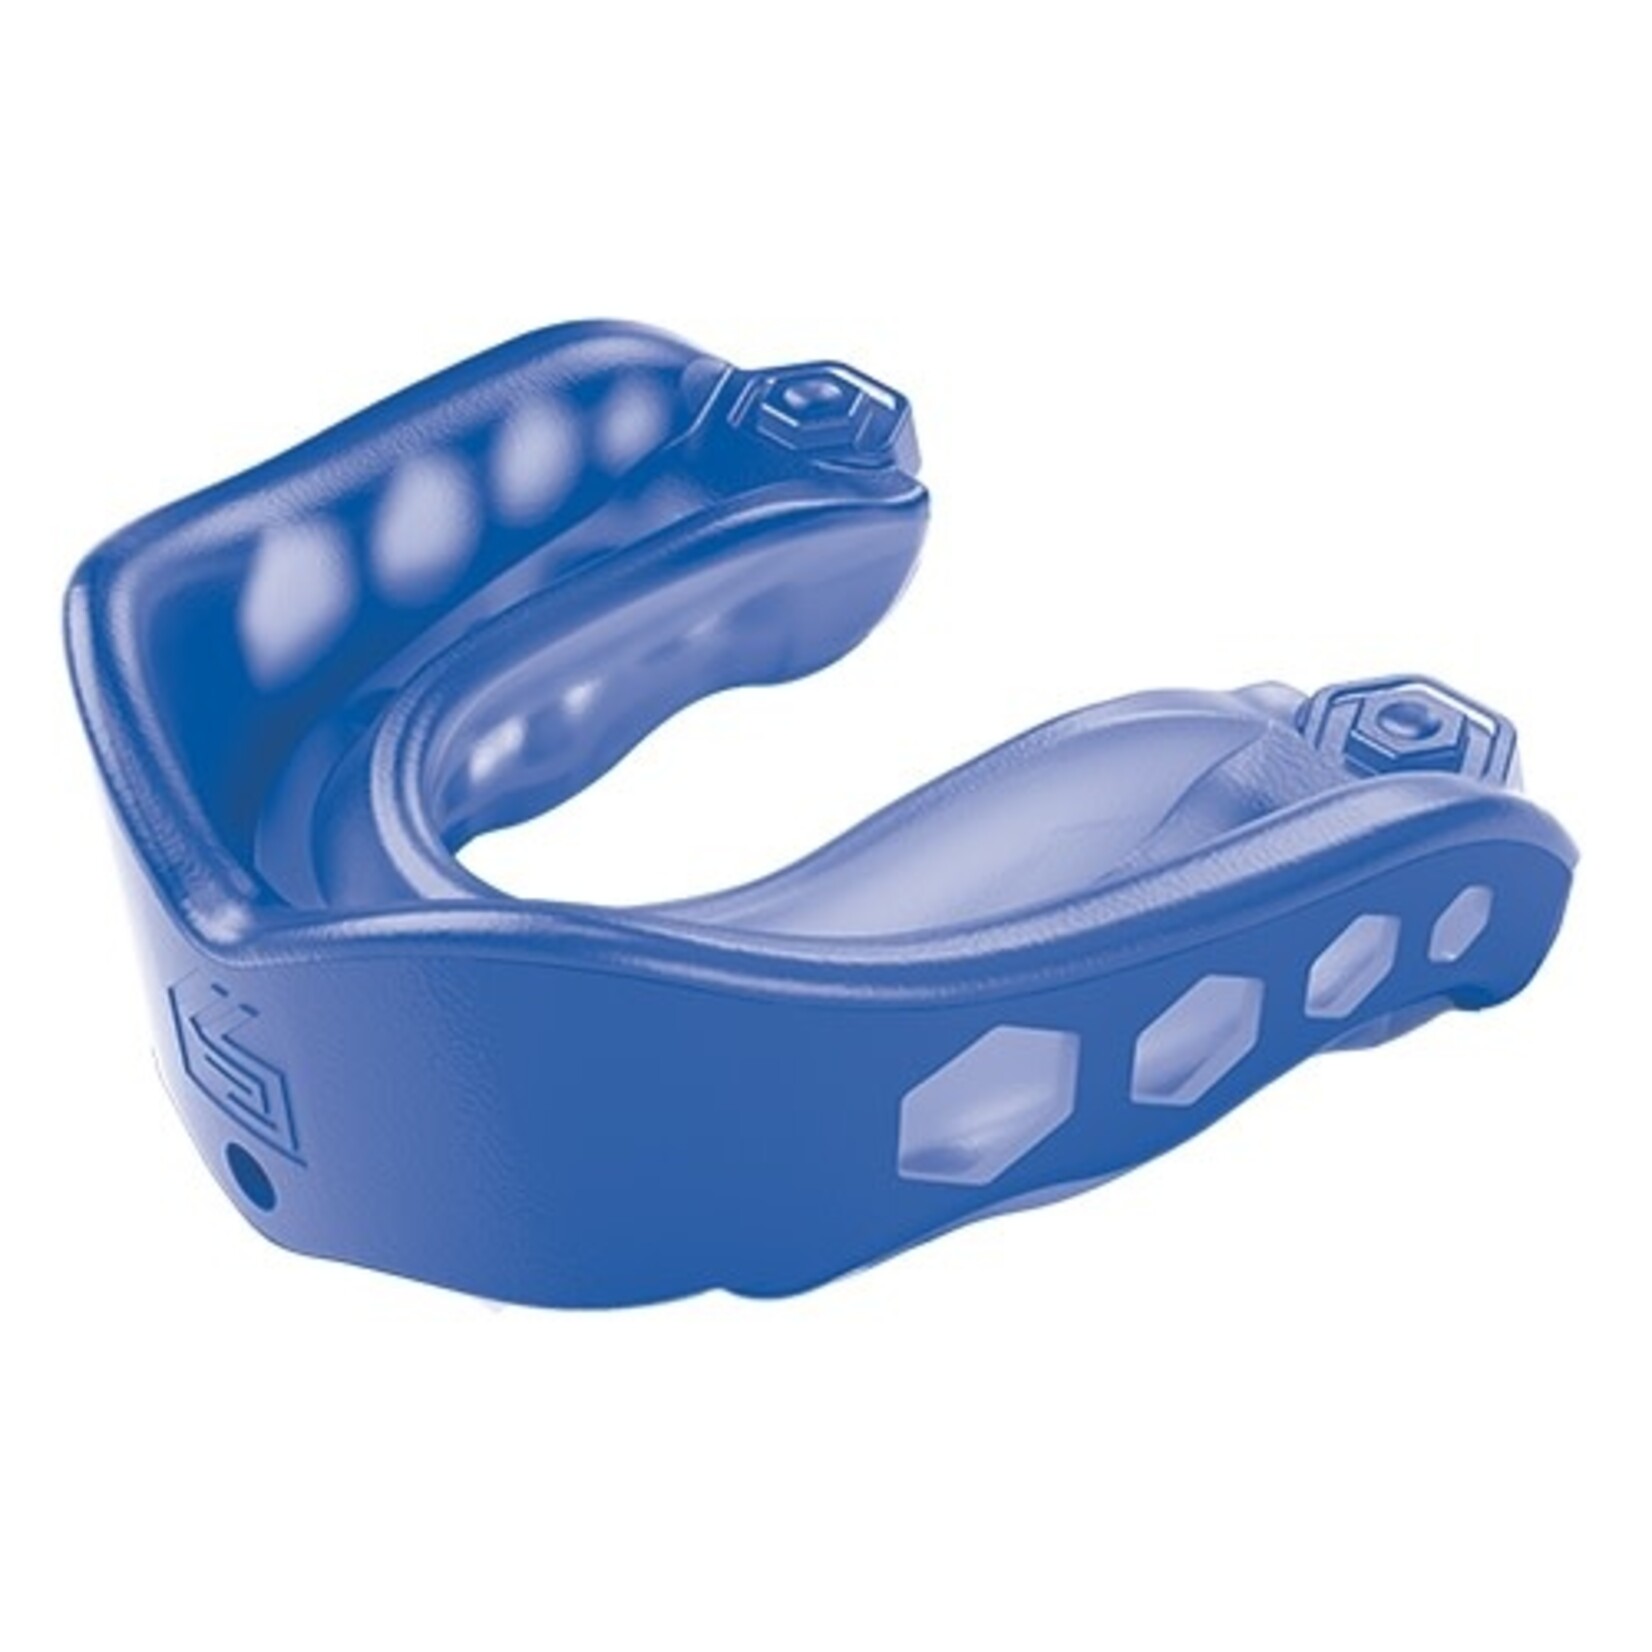 Shock Doctor Shock Doctor Gel Max Convertible Mouthguard (YOUTH)